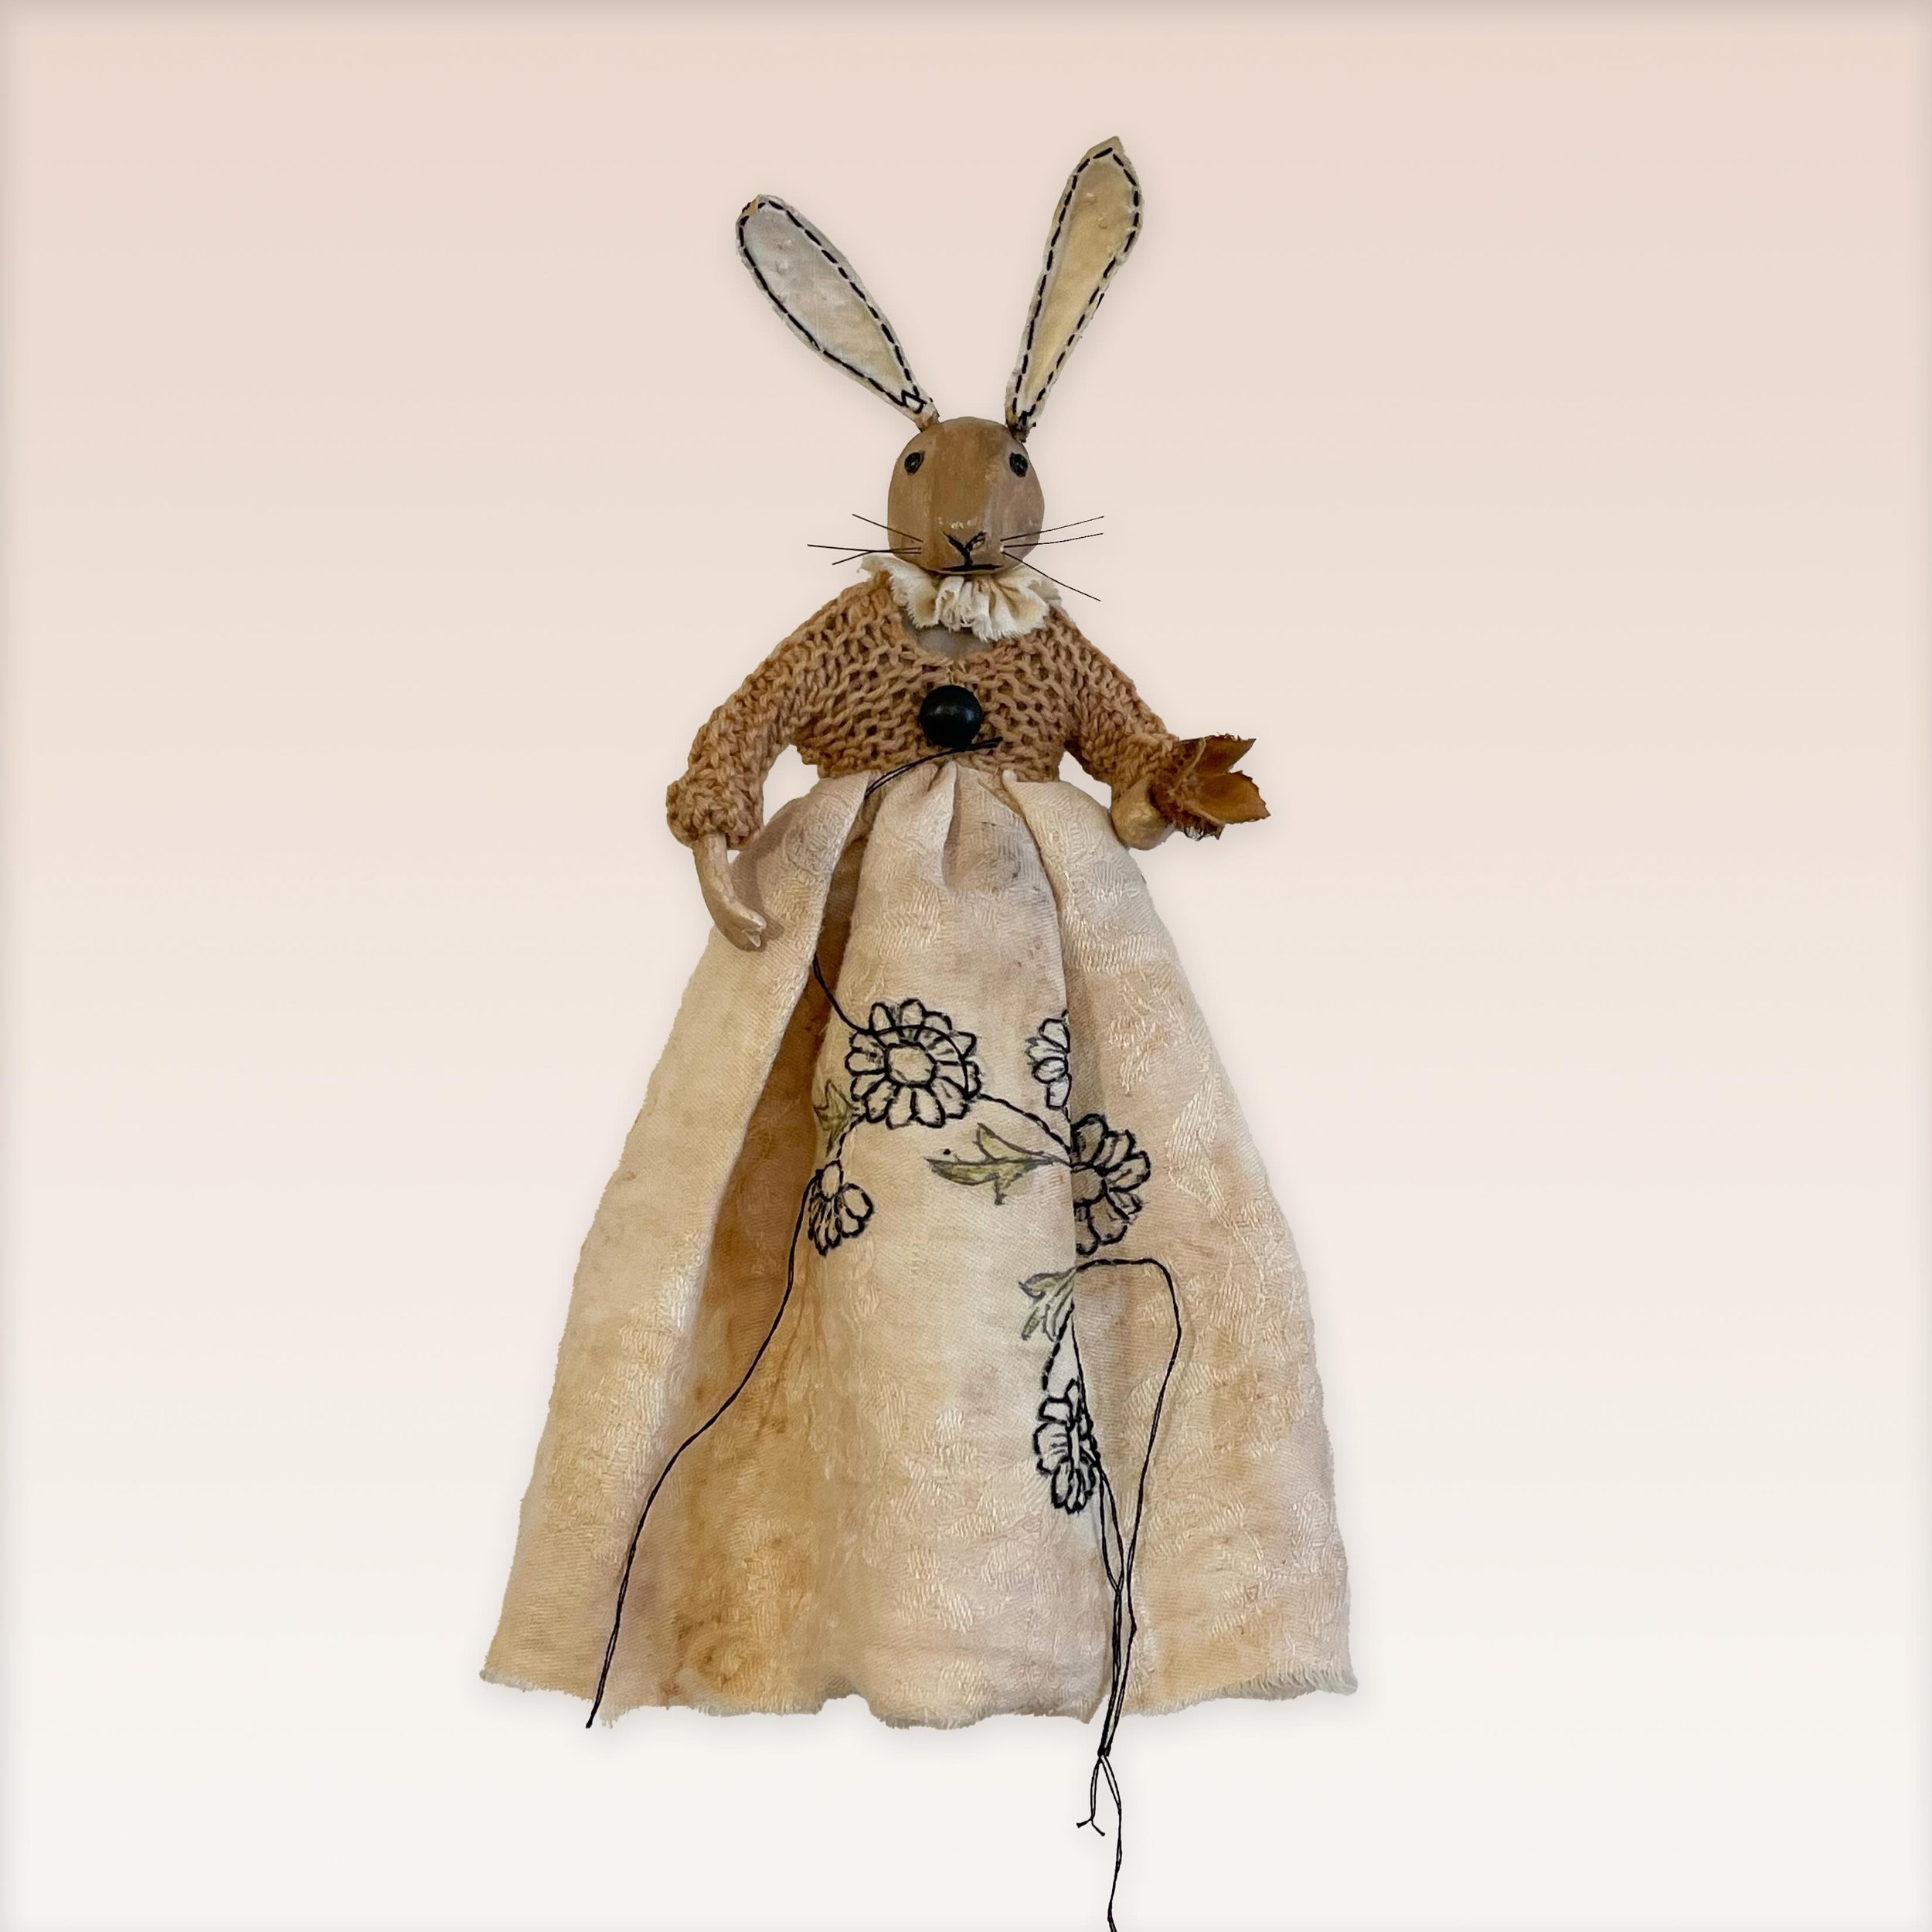 @wanakarabbits by Medici Studio now in store!

Wanaka Rabbits celebrate the individual details that make up our region. They are created from our immediate surroundings - vintage table napkins, fabrics and wool sourced from our charity shops, dyed wi